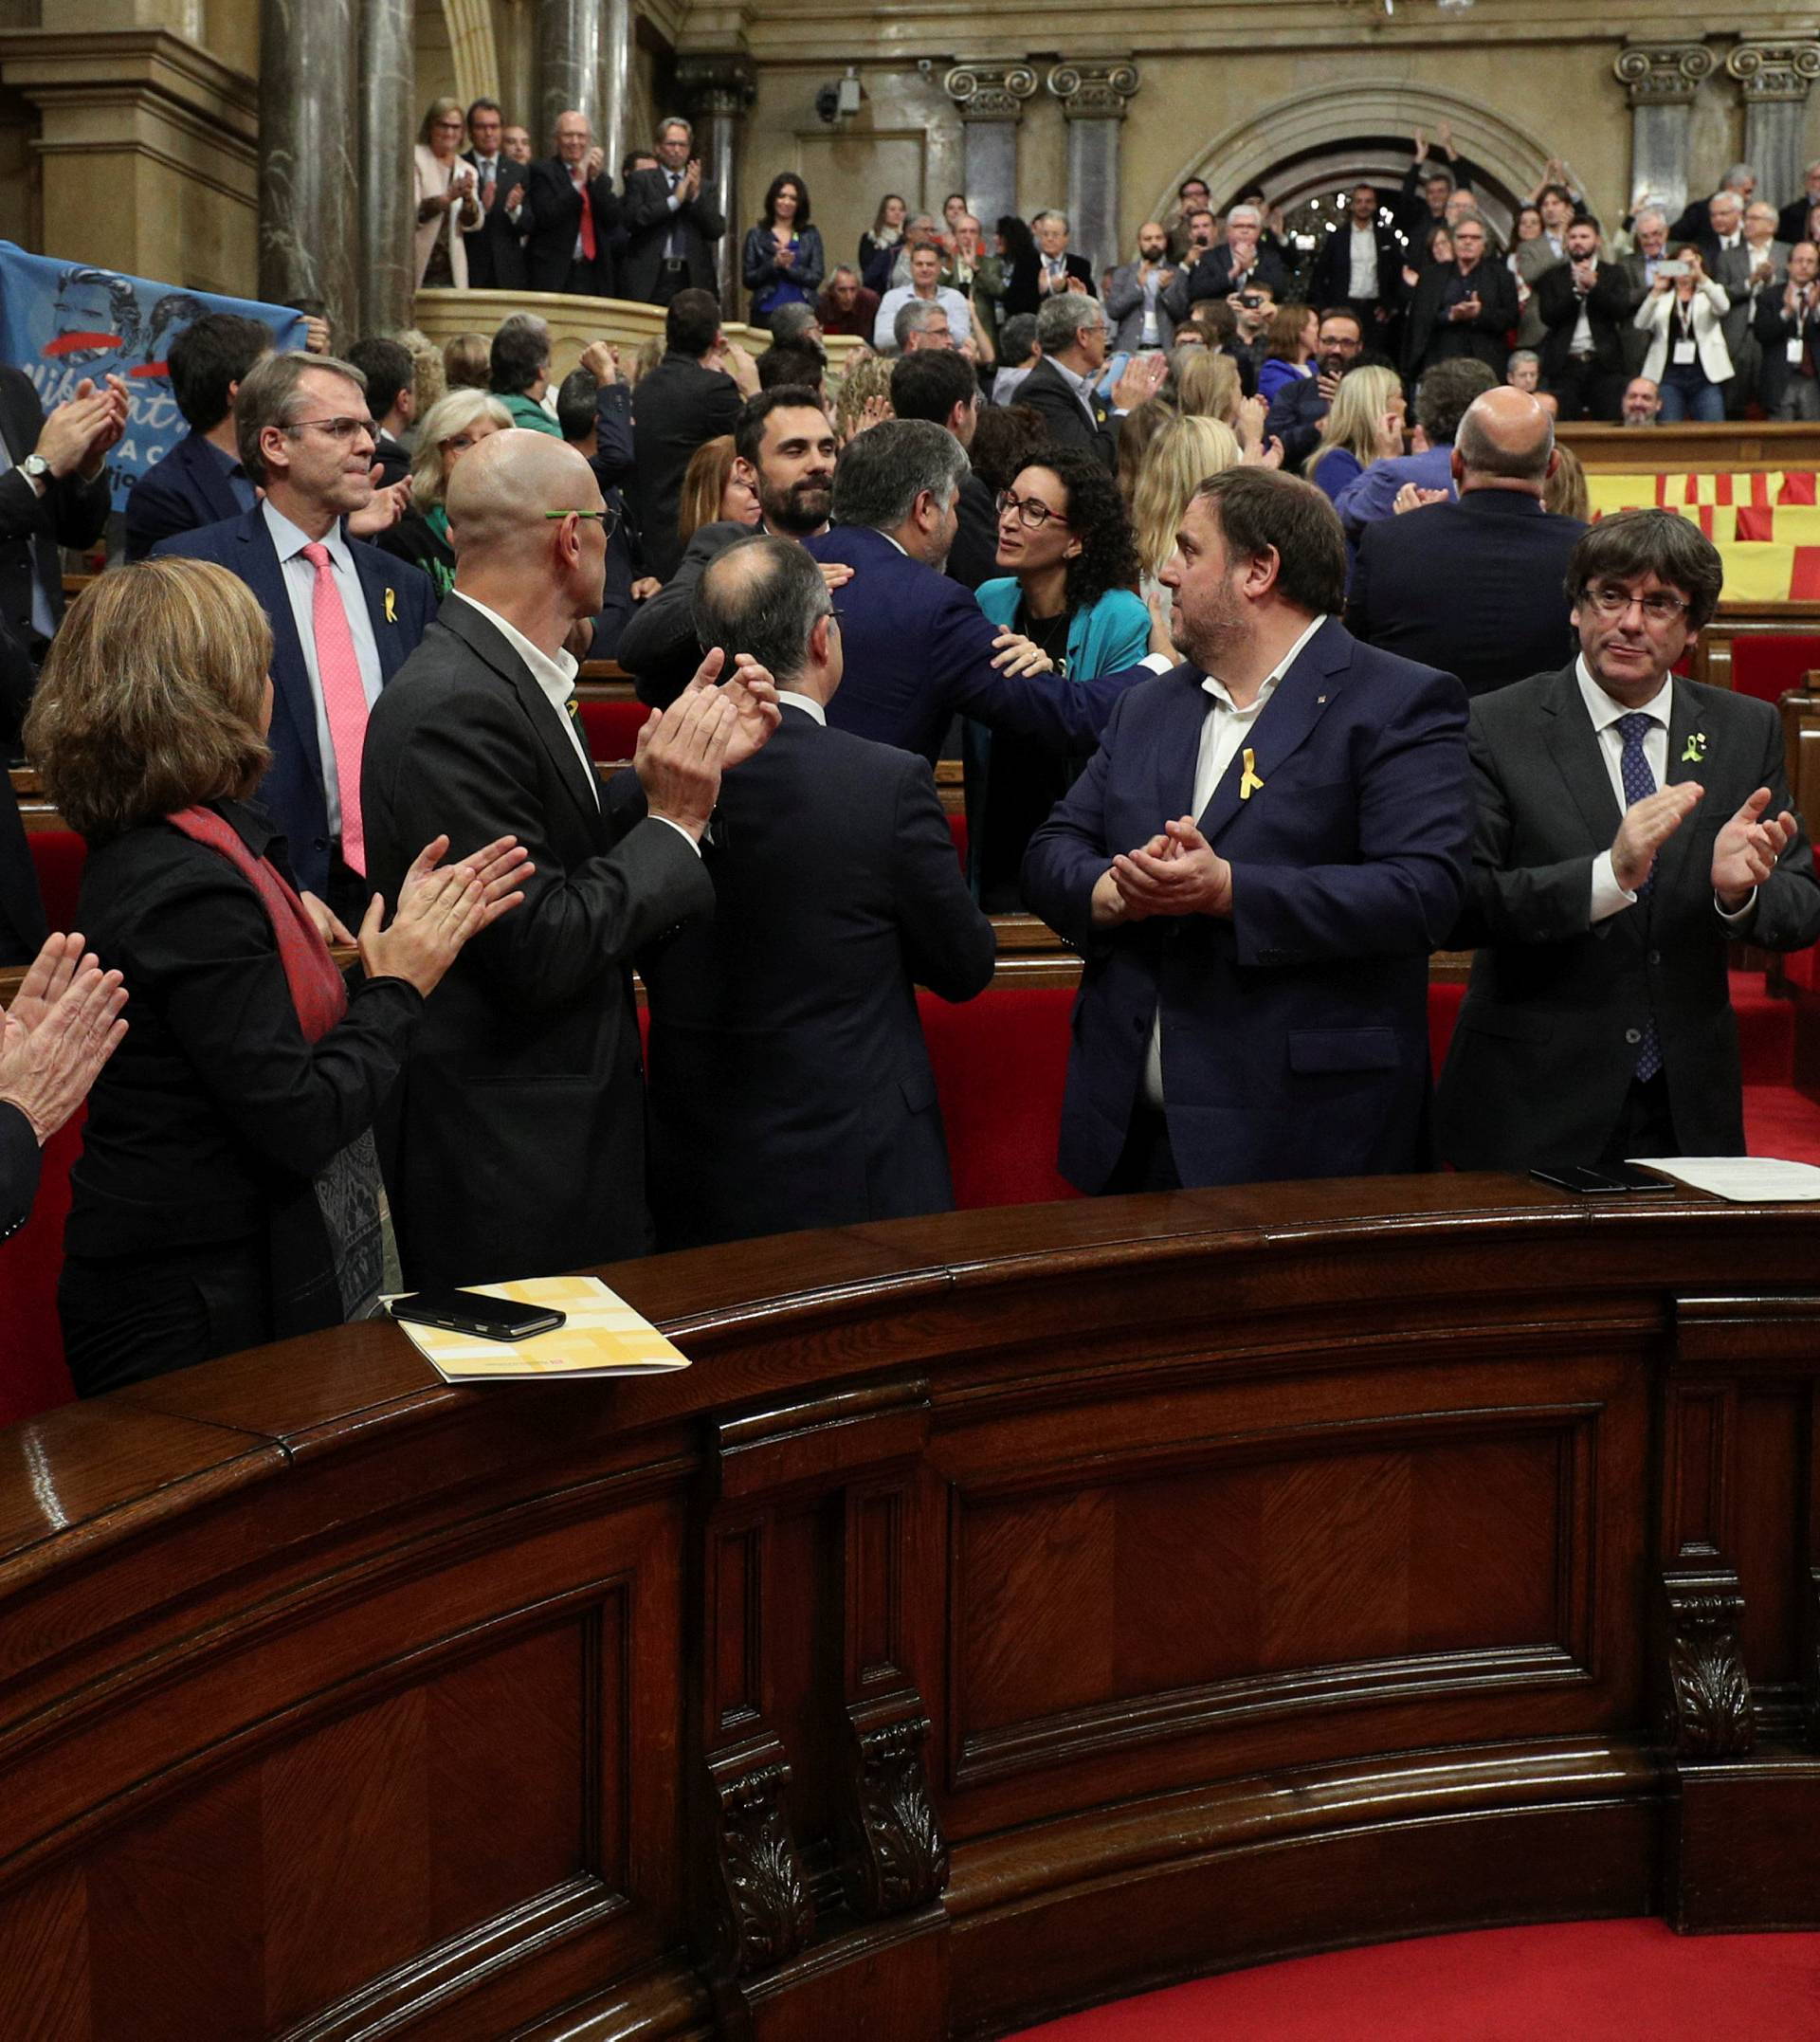 Catalan President Puigdemont and deputies applaud after the Catalan regional Parliament declared indpendence from Spain in Barcelona